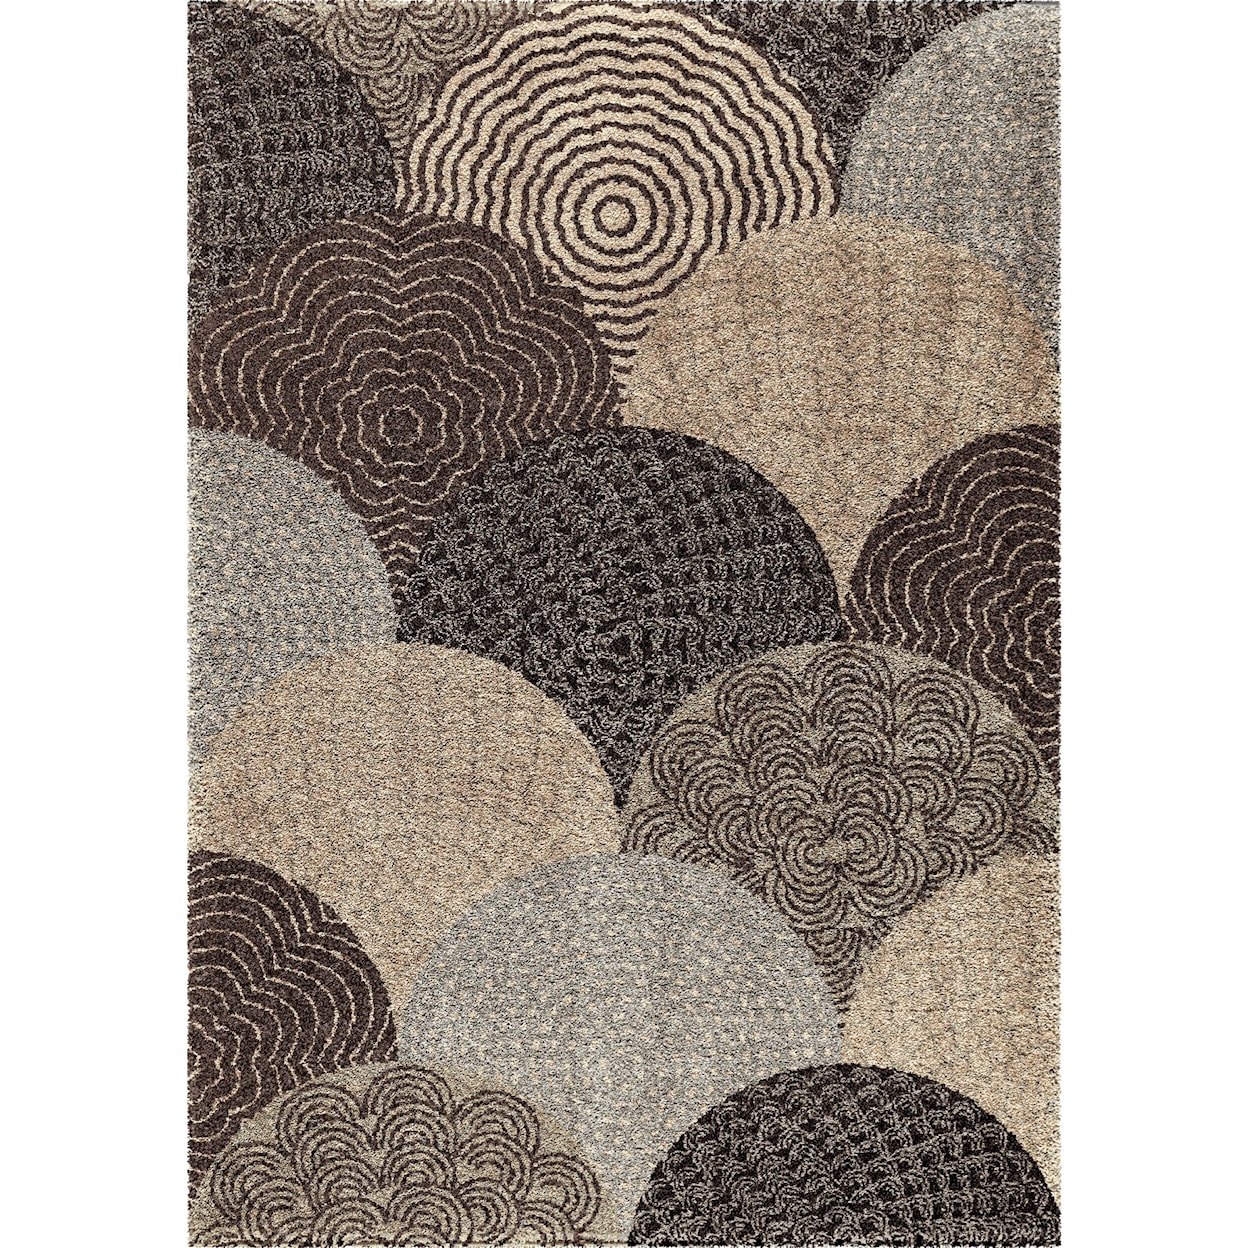 Orian Rugs Wild Weave Oystershell Seal Black 5'3" x 7'6" Rug